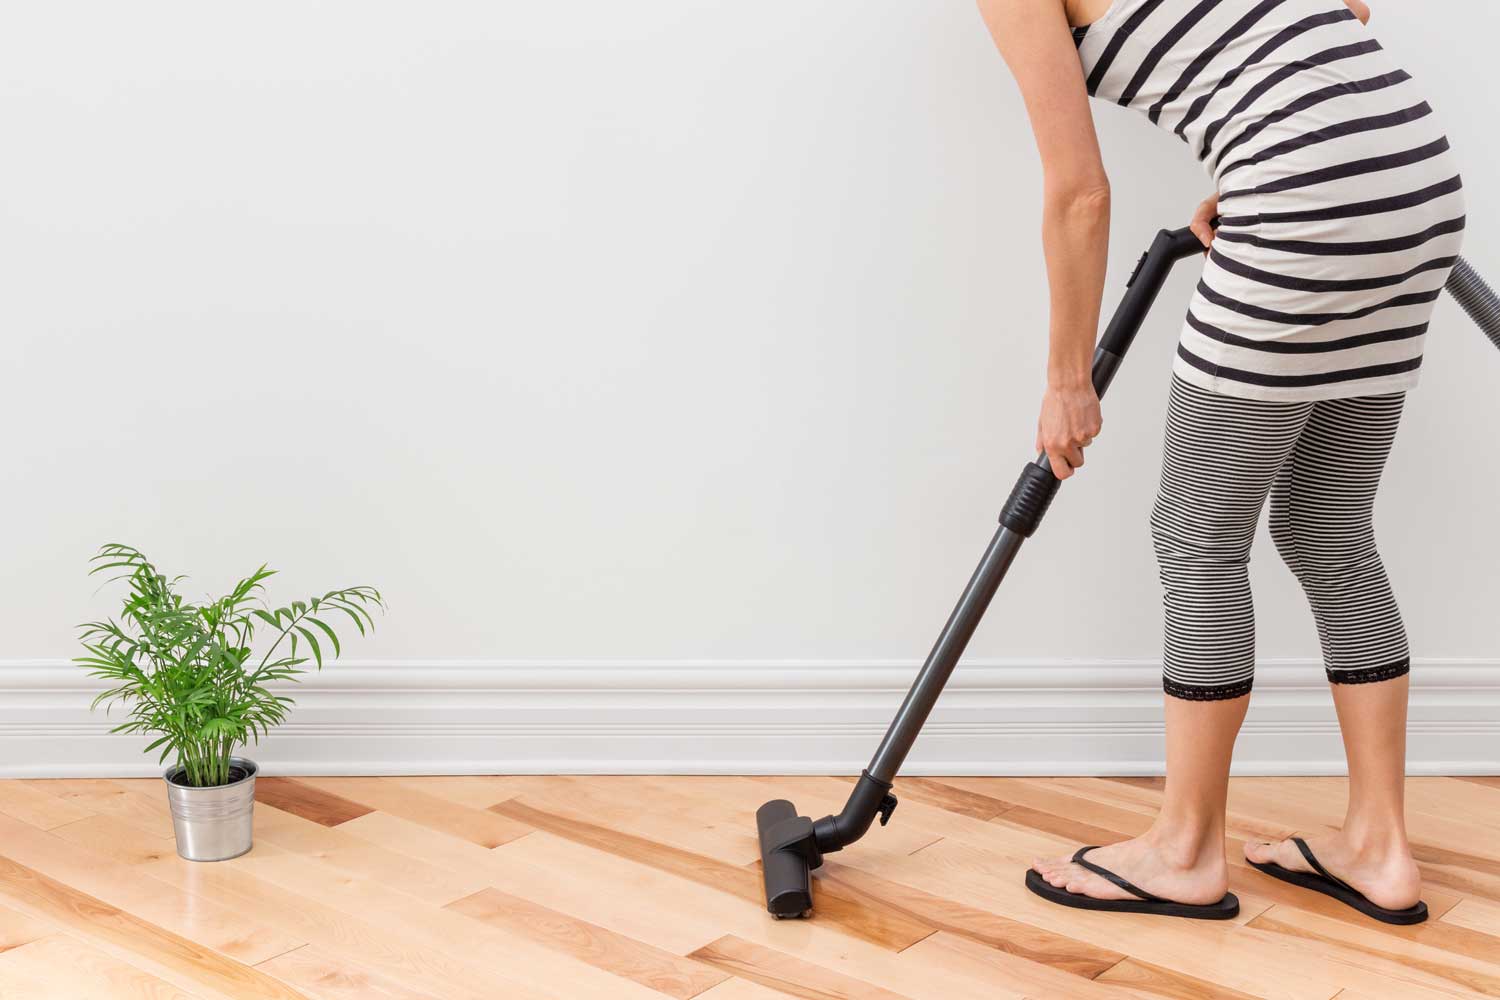 Regulary vacuum or sweep floors to remove dirt and keep your home floors looking amazing - tips from Footprints Floors in Denver.